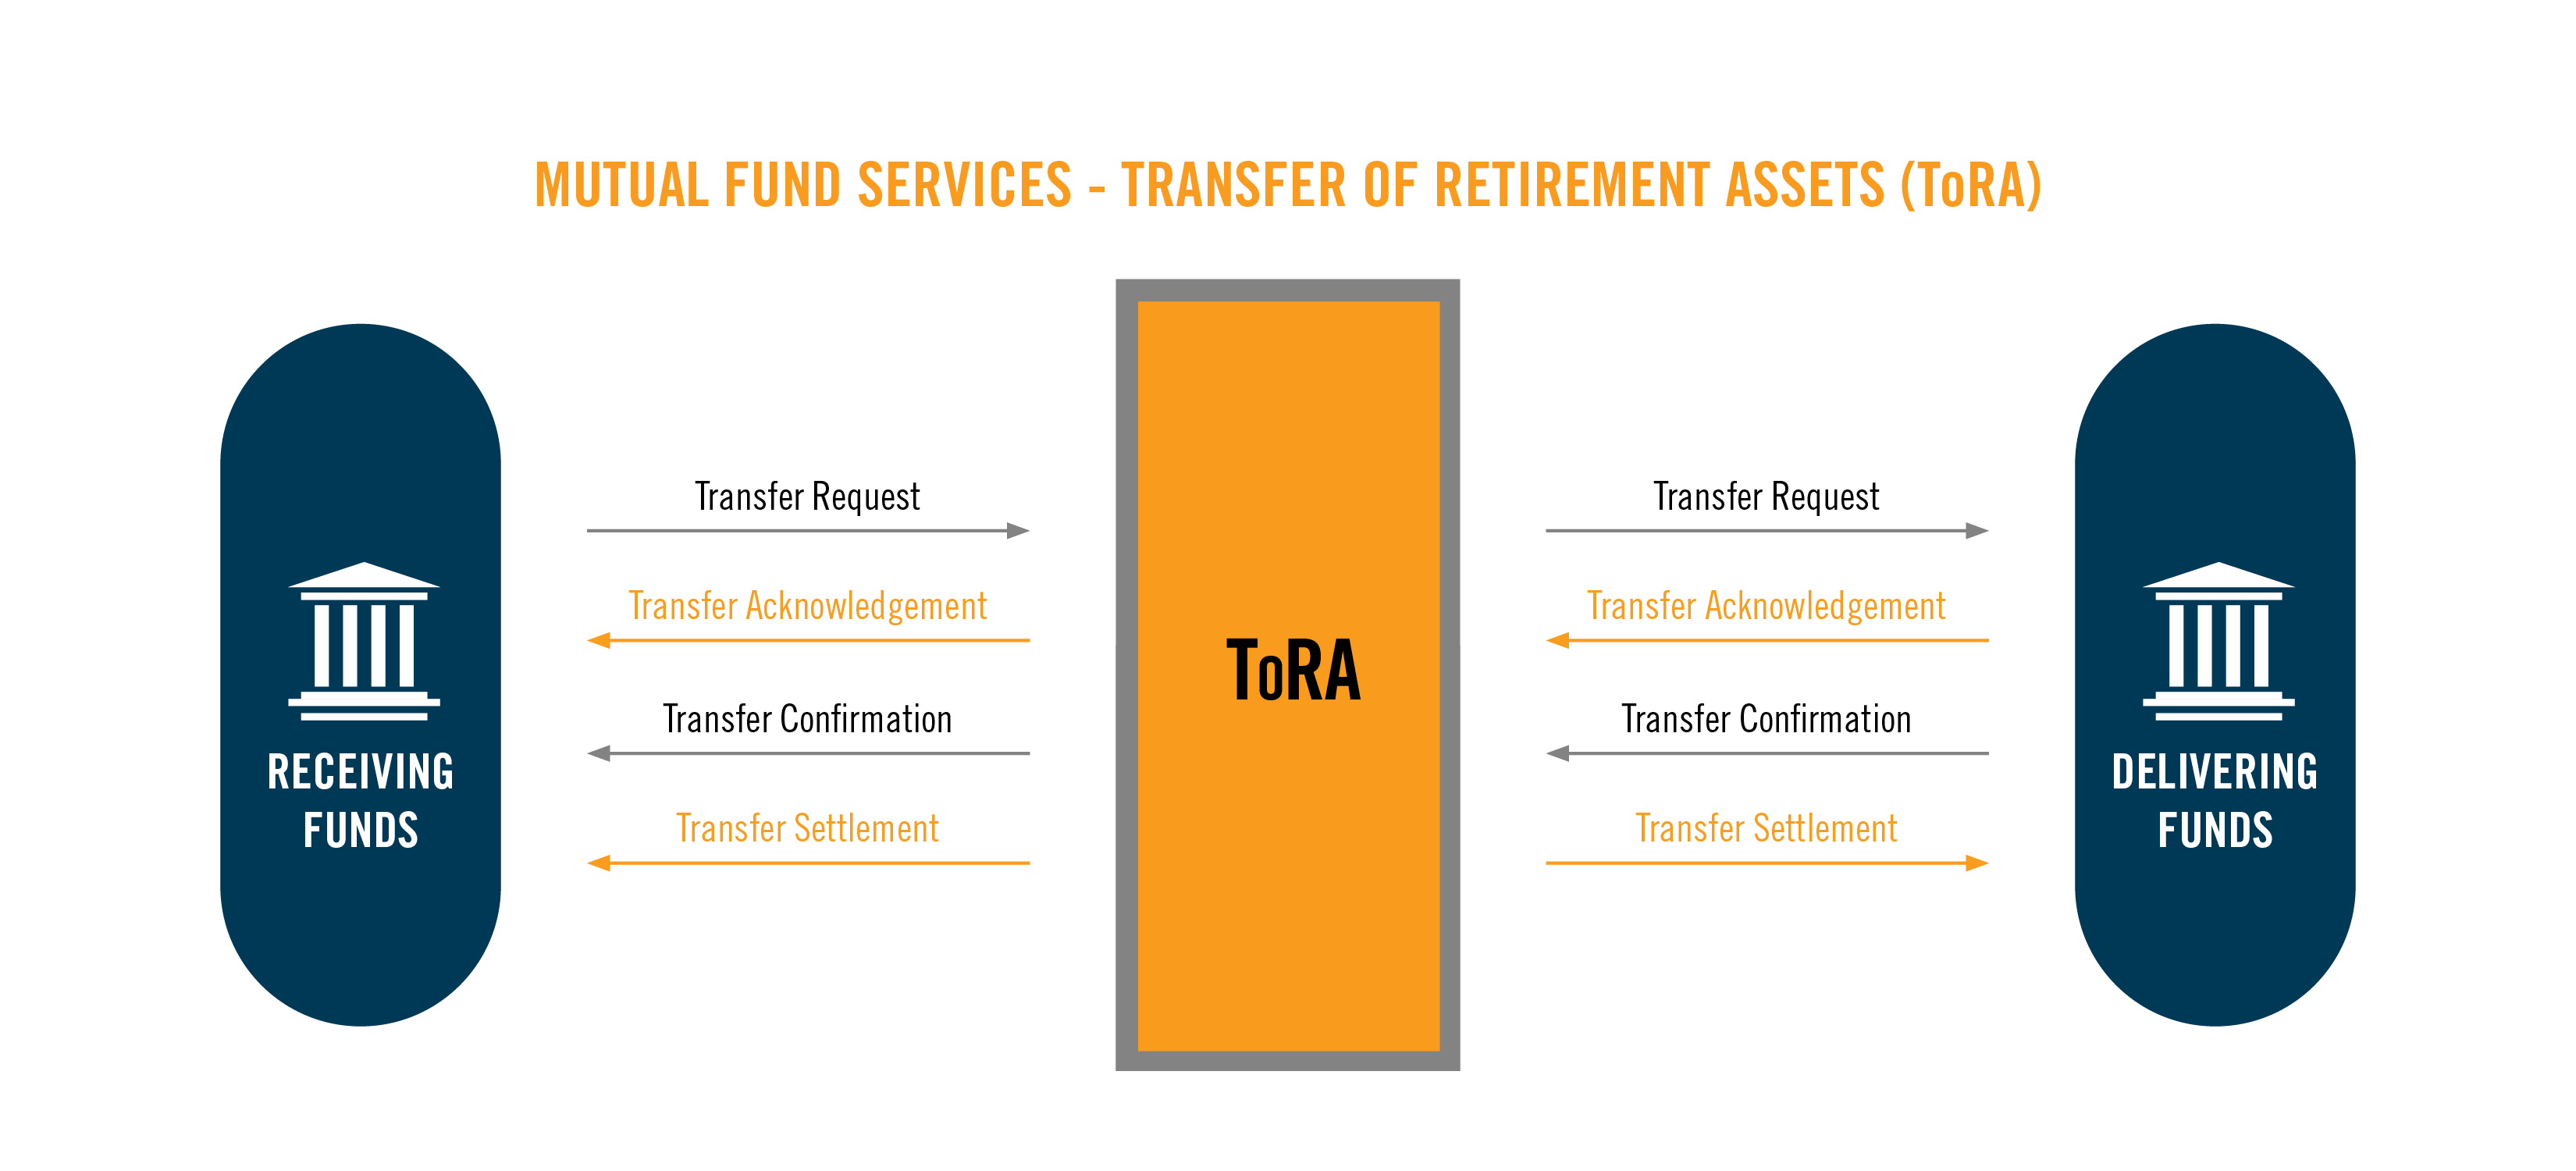 26941 Transfer of Retirement Assets Schematic